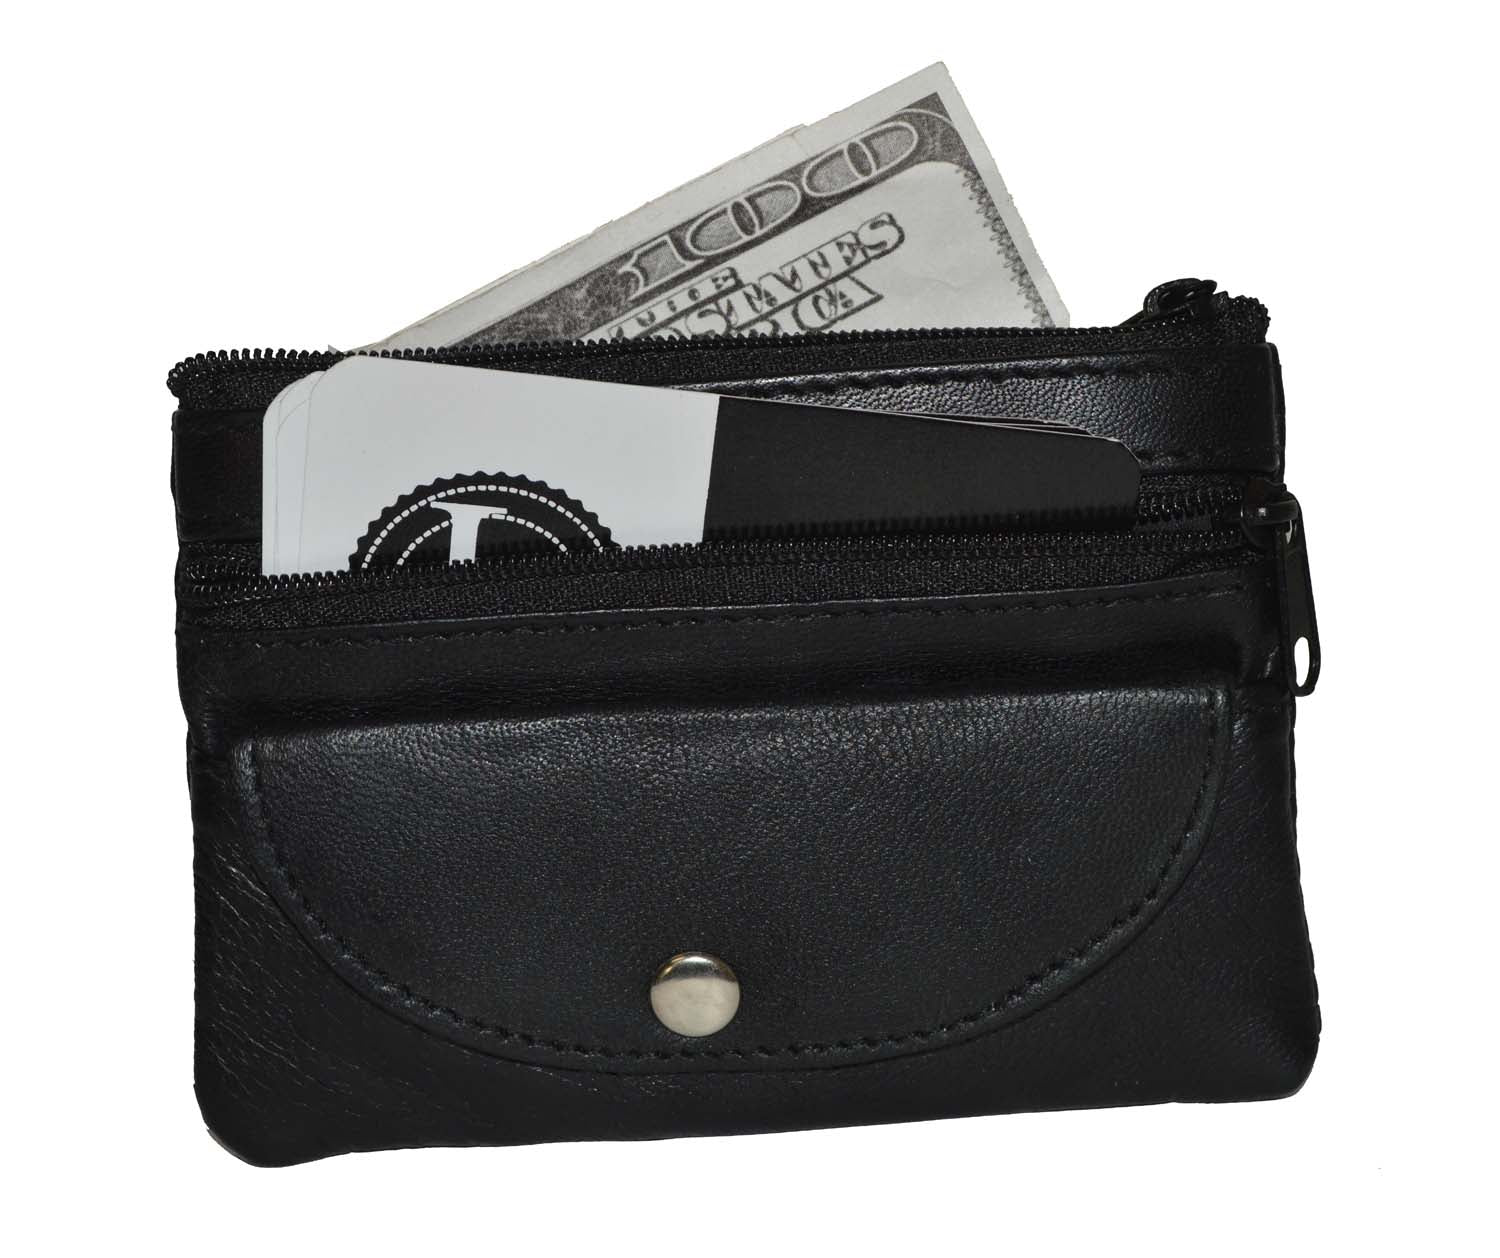 Black Leather Coin Purse Mini Wallet Key Pouch 2 Zippered Sections ID Slot Black